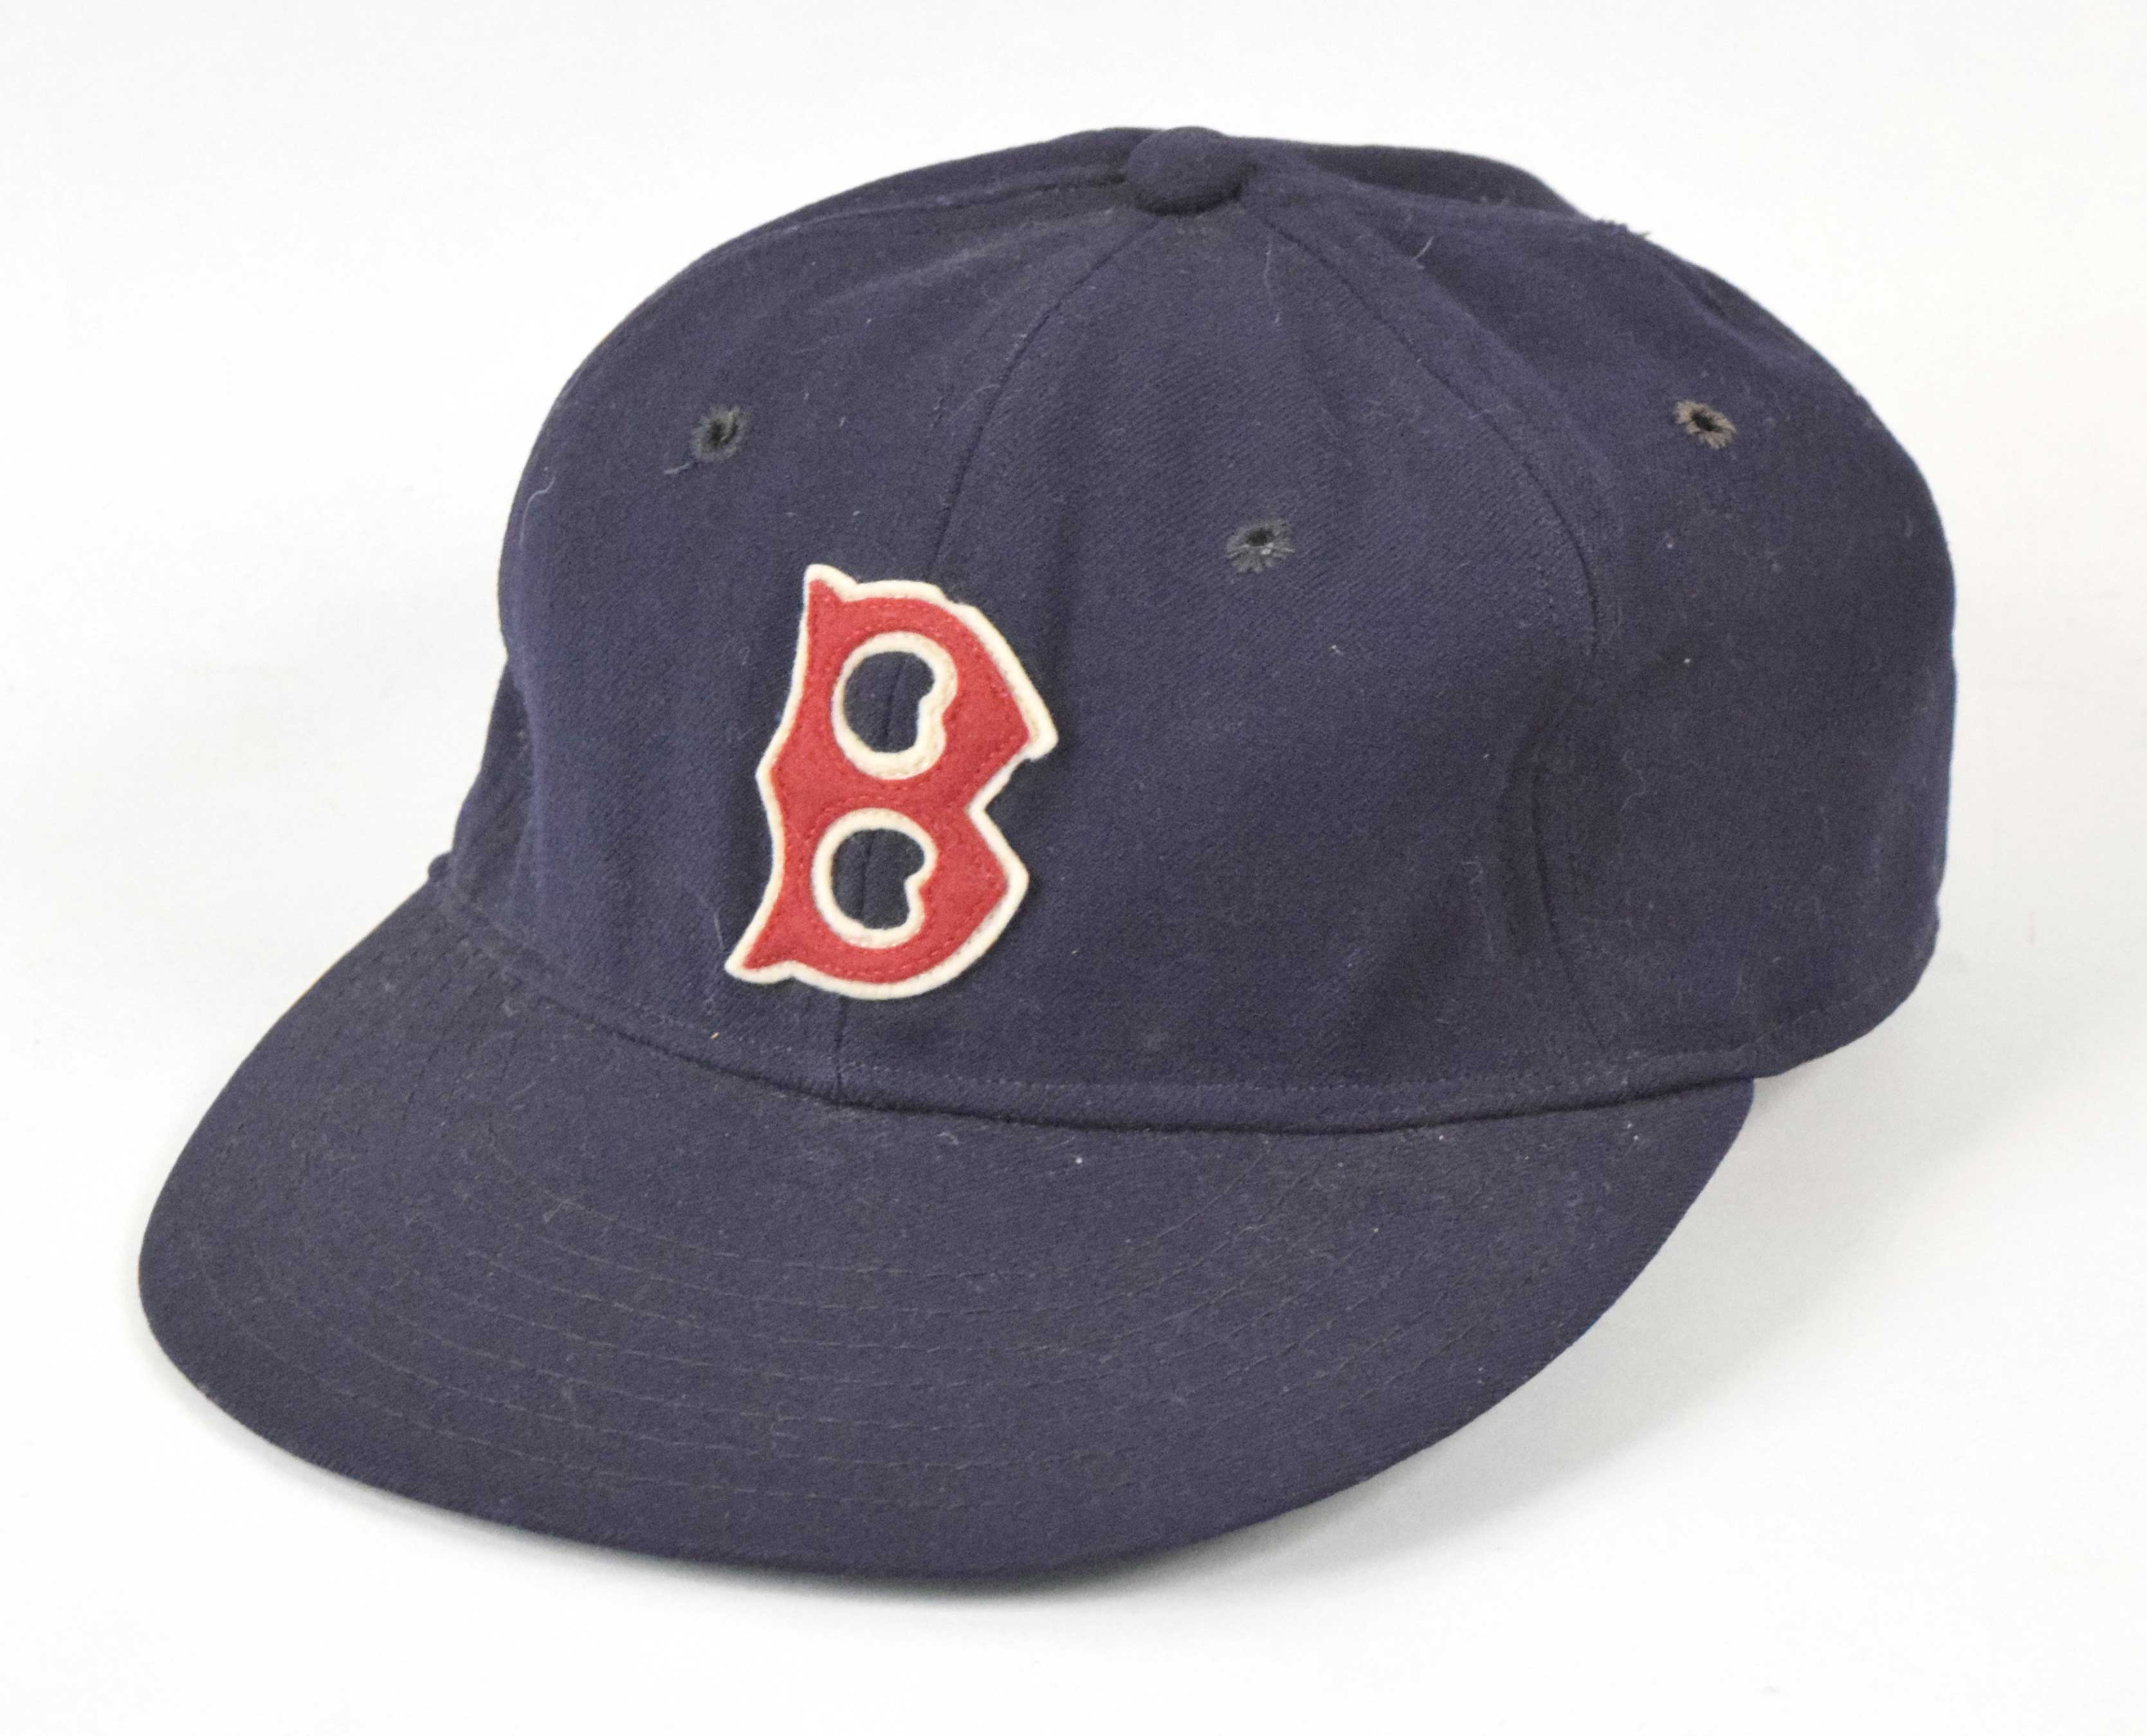 The official auction site of Red Sox Auctions